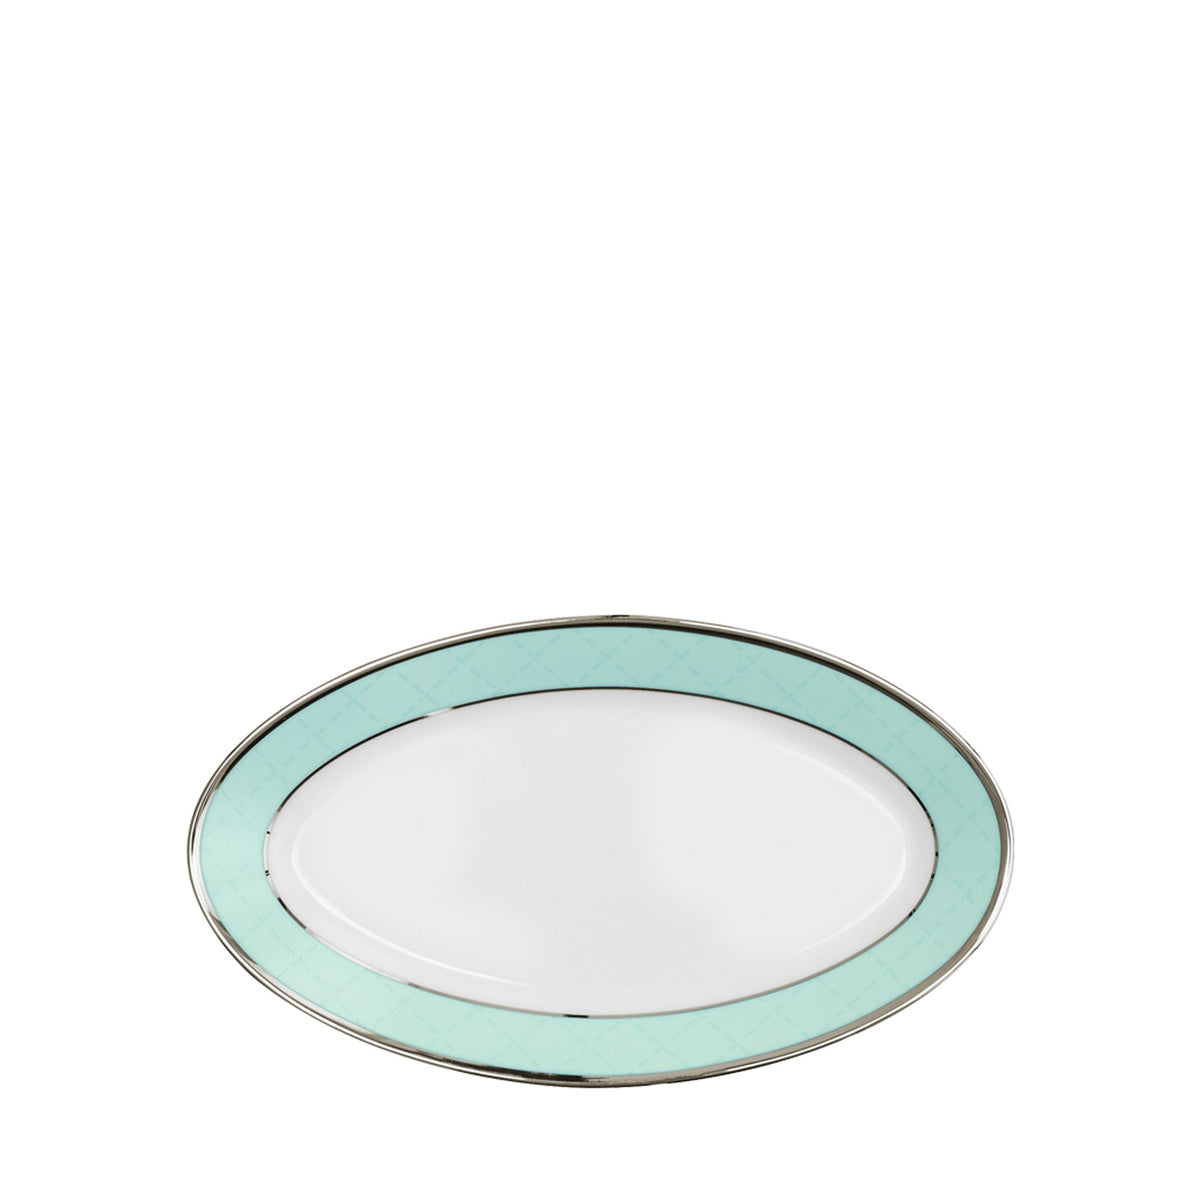 ETHEREAL BLUE MIR OVAL PICKLE DISH 22CM